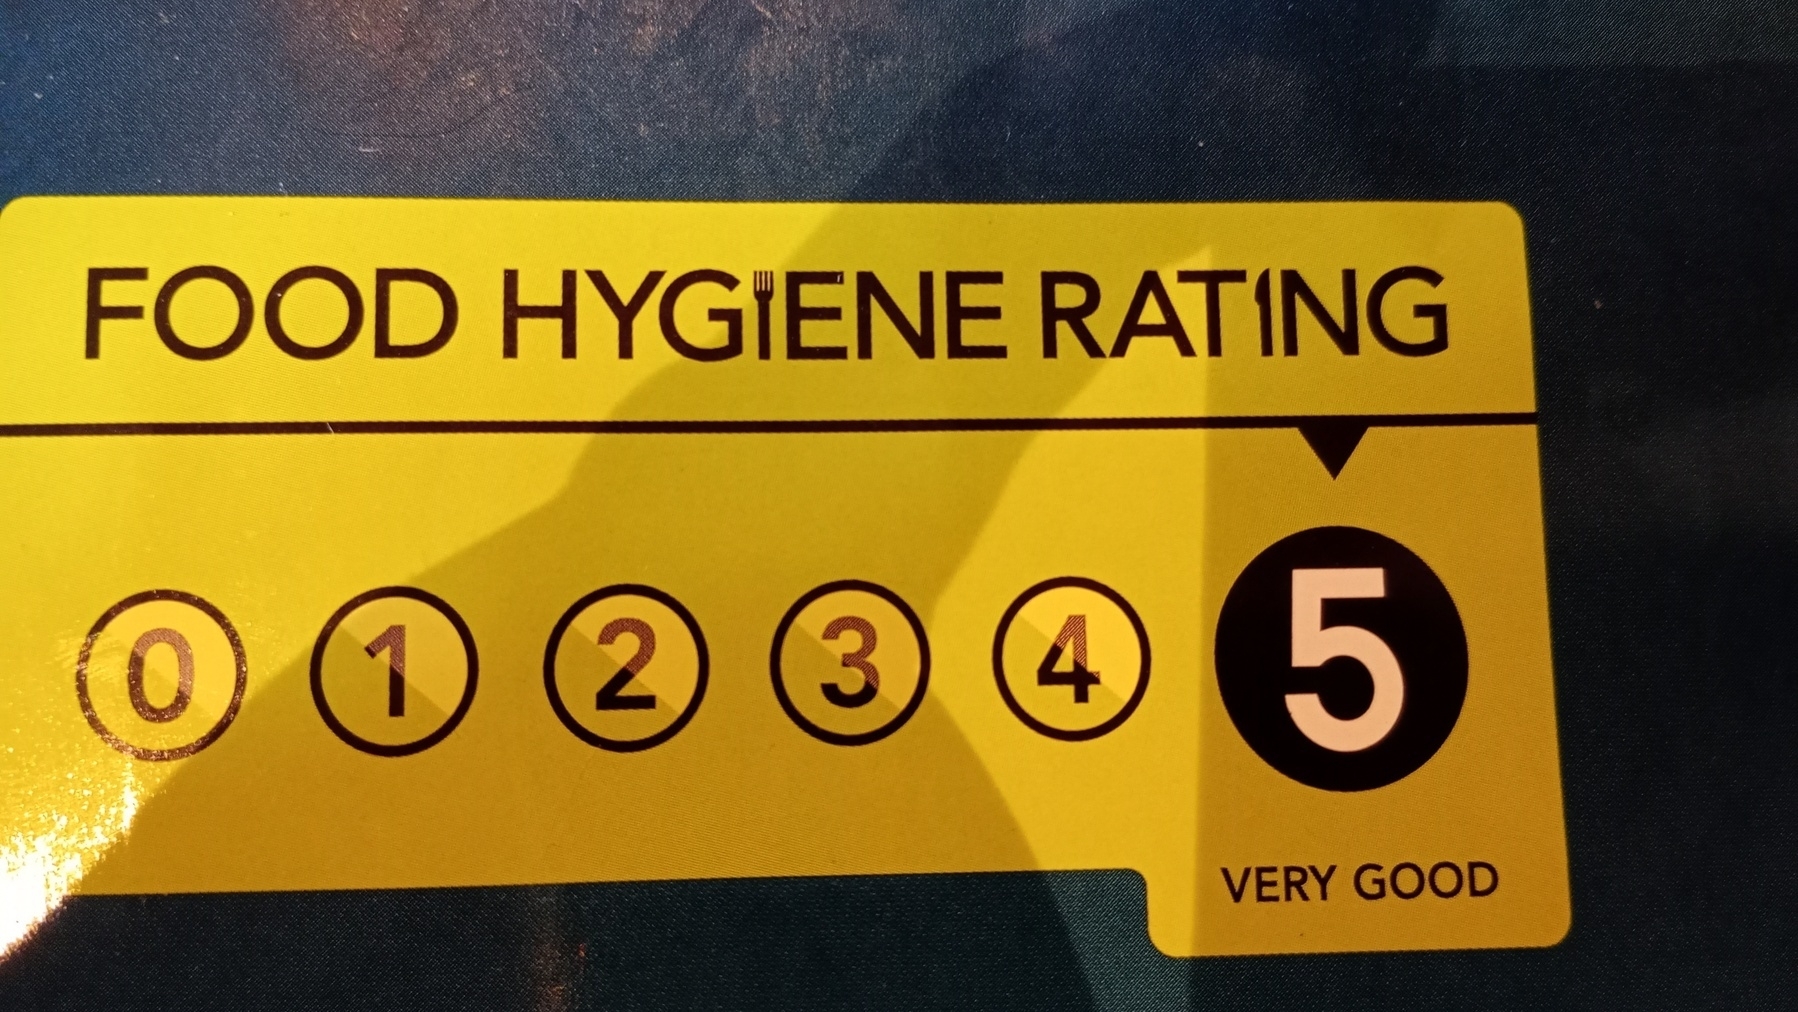 food hygiene rating poster showing a scale of 0 to 5